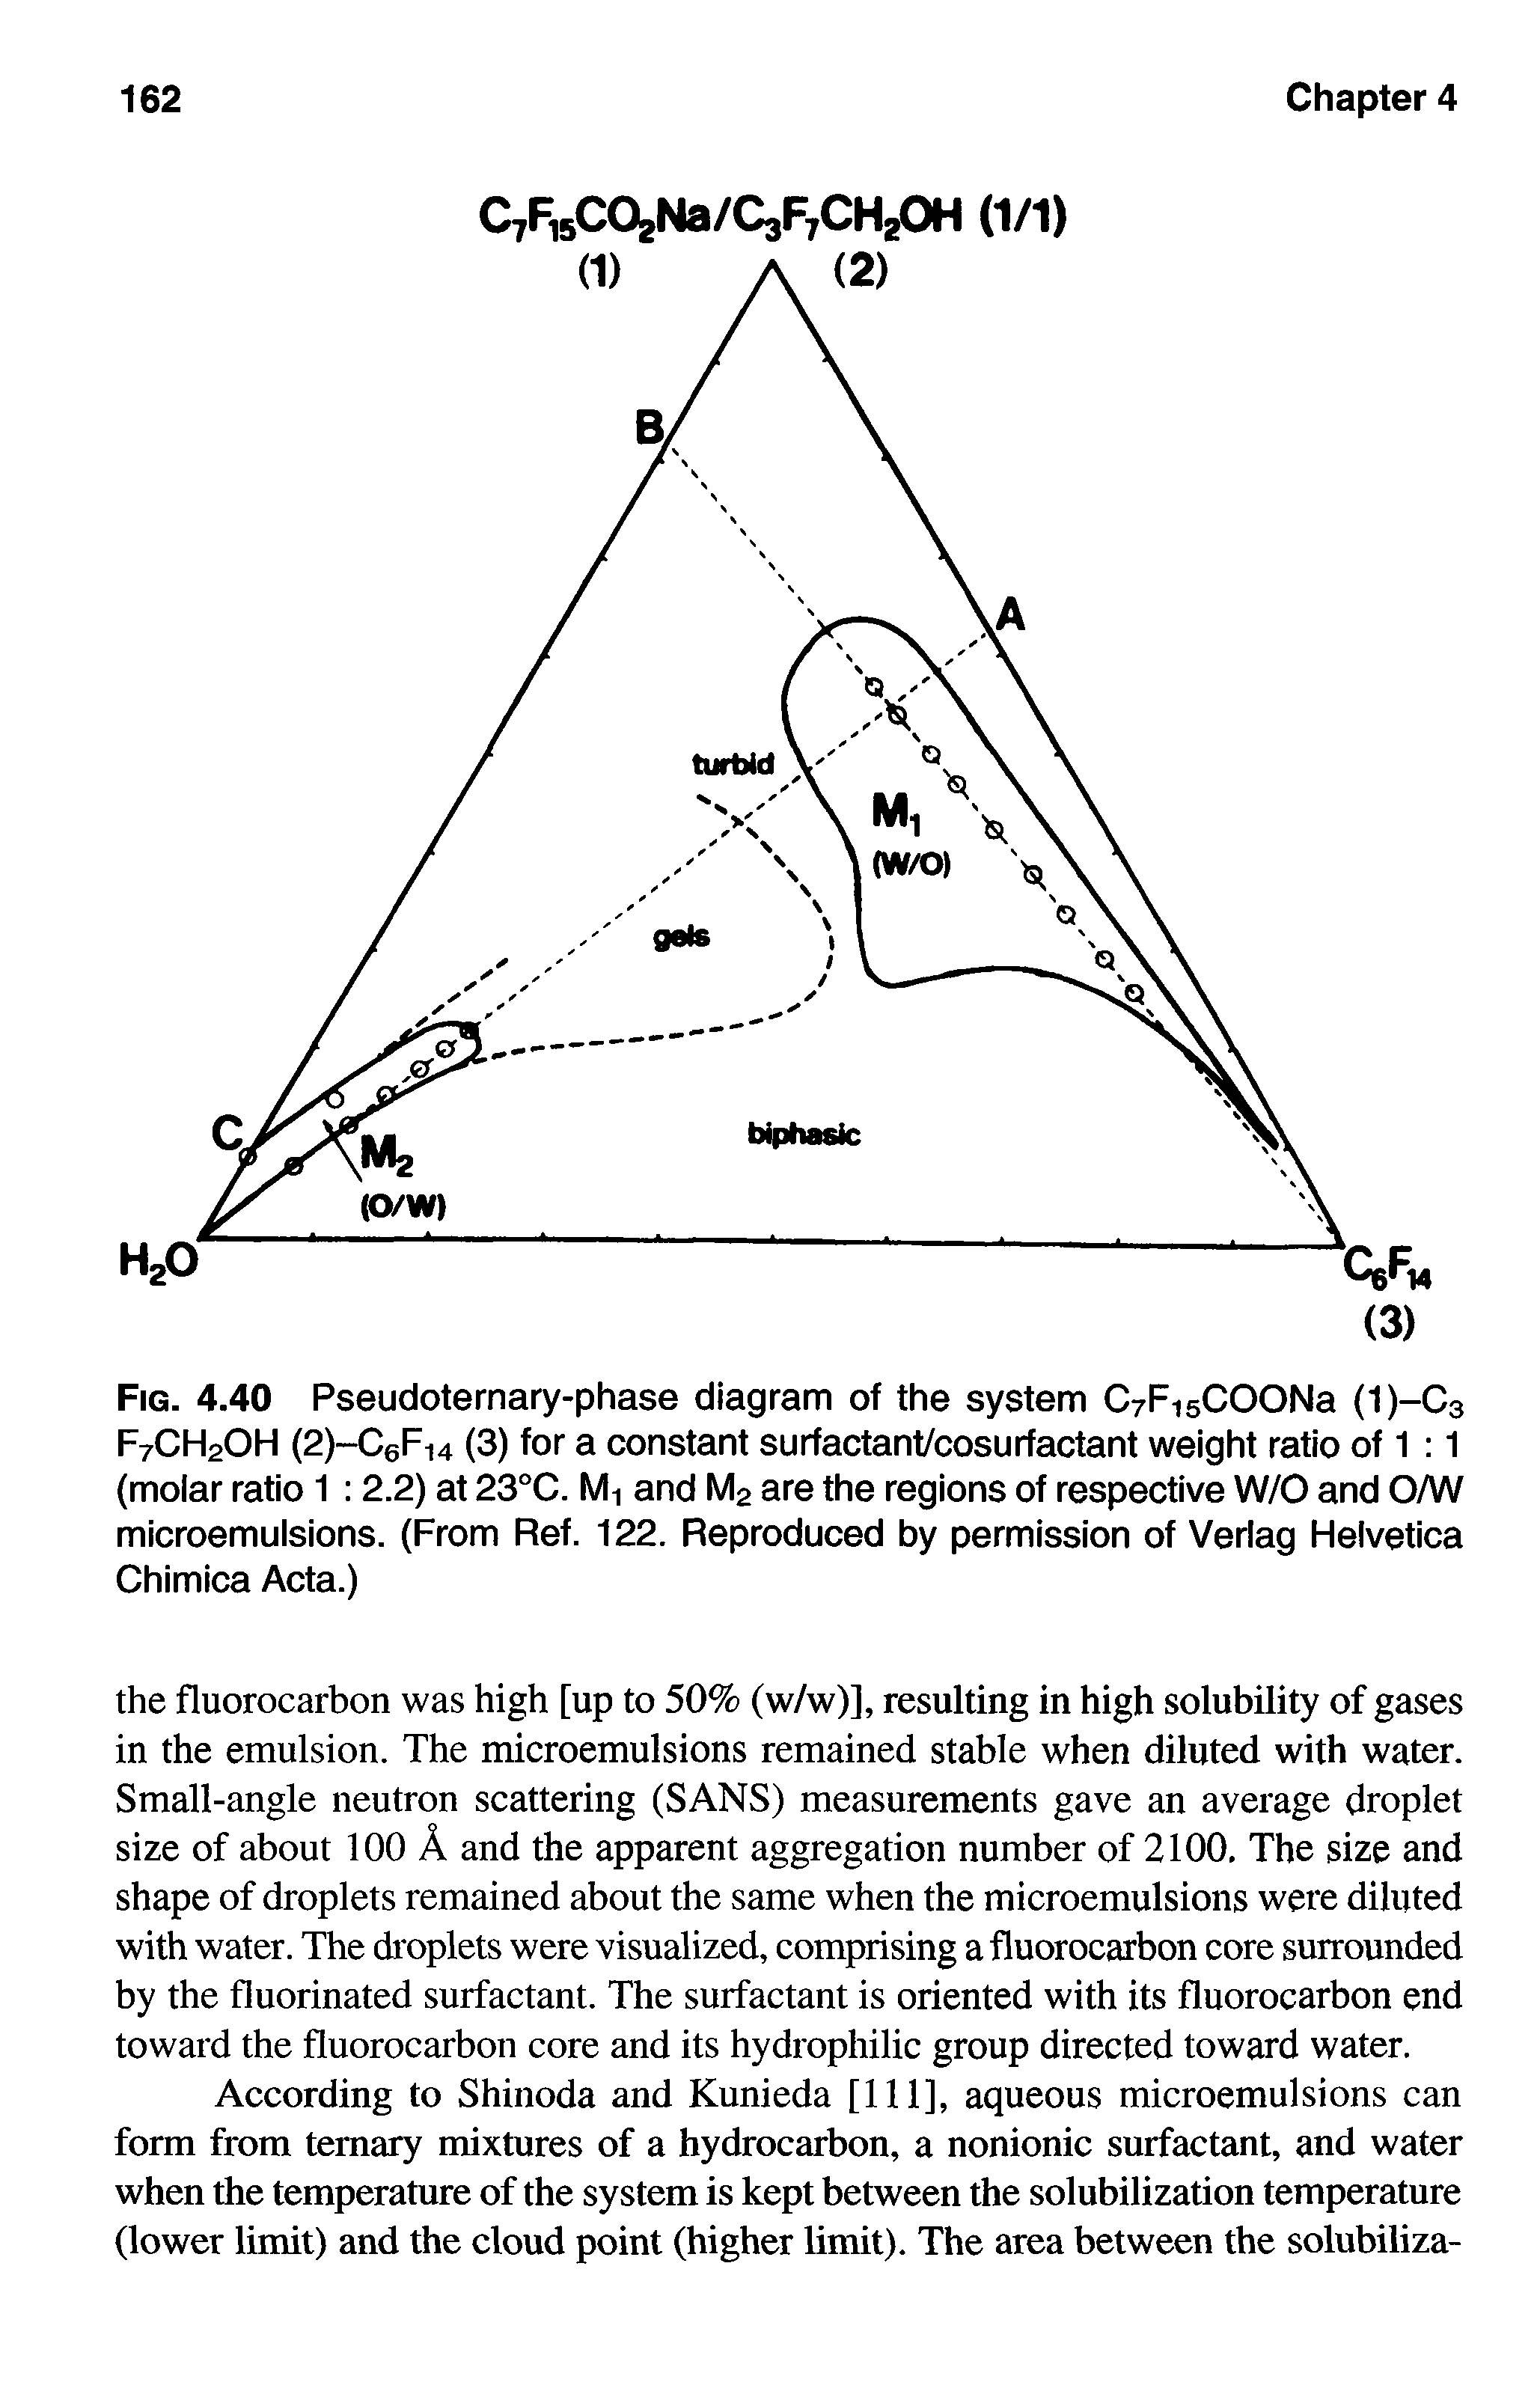 Fig. 4.40 Pseudoternary-phase diagram of the system CyFisCOONa (1)-C3 F7CH2OH (2)-C6Fi4 (3) for a constant surfactant/cosurfactant weight ratio of 1 1 (molar ratio 1 2.2) at 23°C. Mi and M2 are the regions of respective W/0 and O/W microemulsions. (From Ref. 122. Reproduced by permission of Verlag Helvetica Chimica Acta.)...